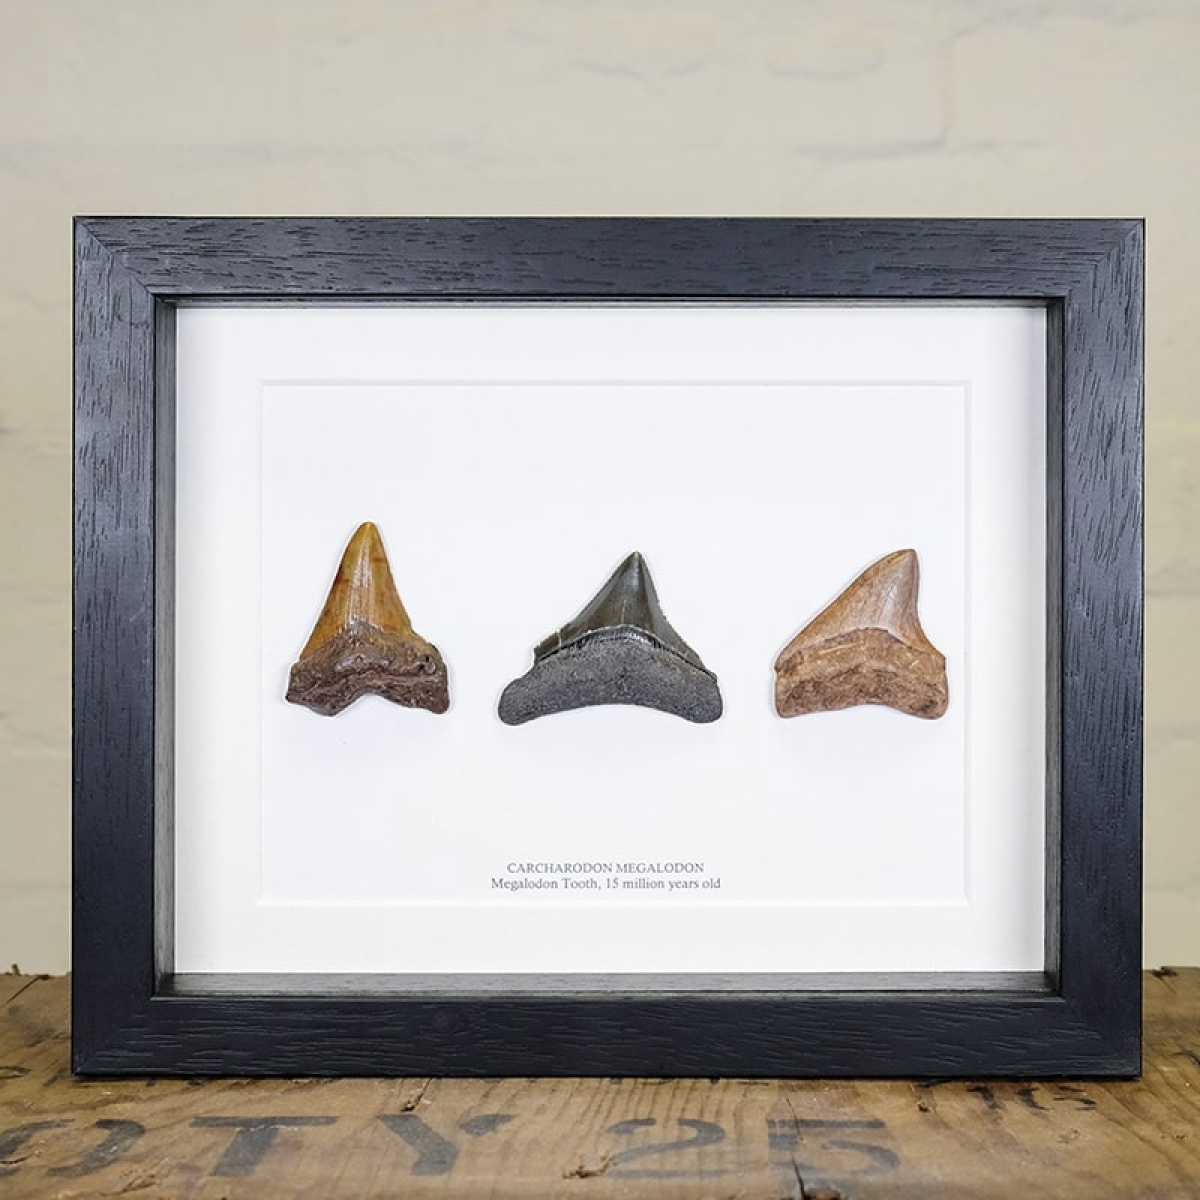 Minibeast A Trio of Small Megalodon Shark Teeth (Carcharodon megalodon) Fossil in Box Frame